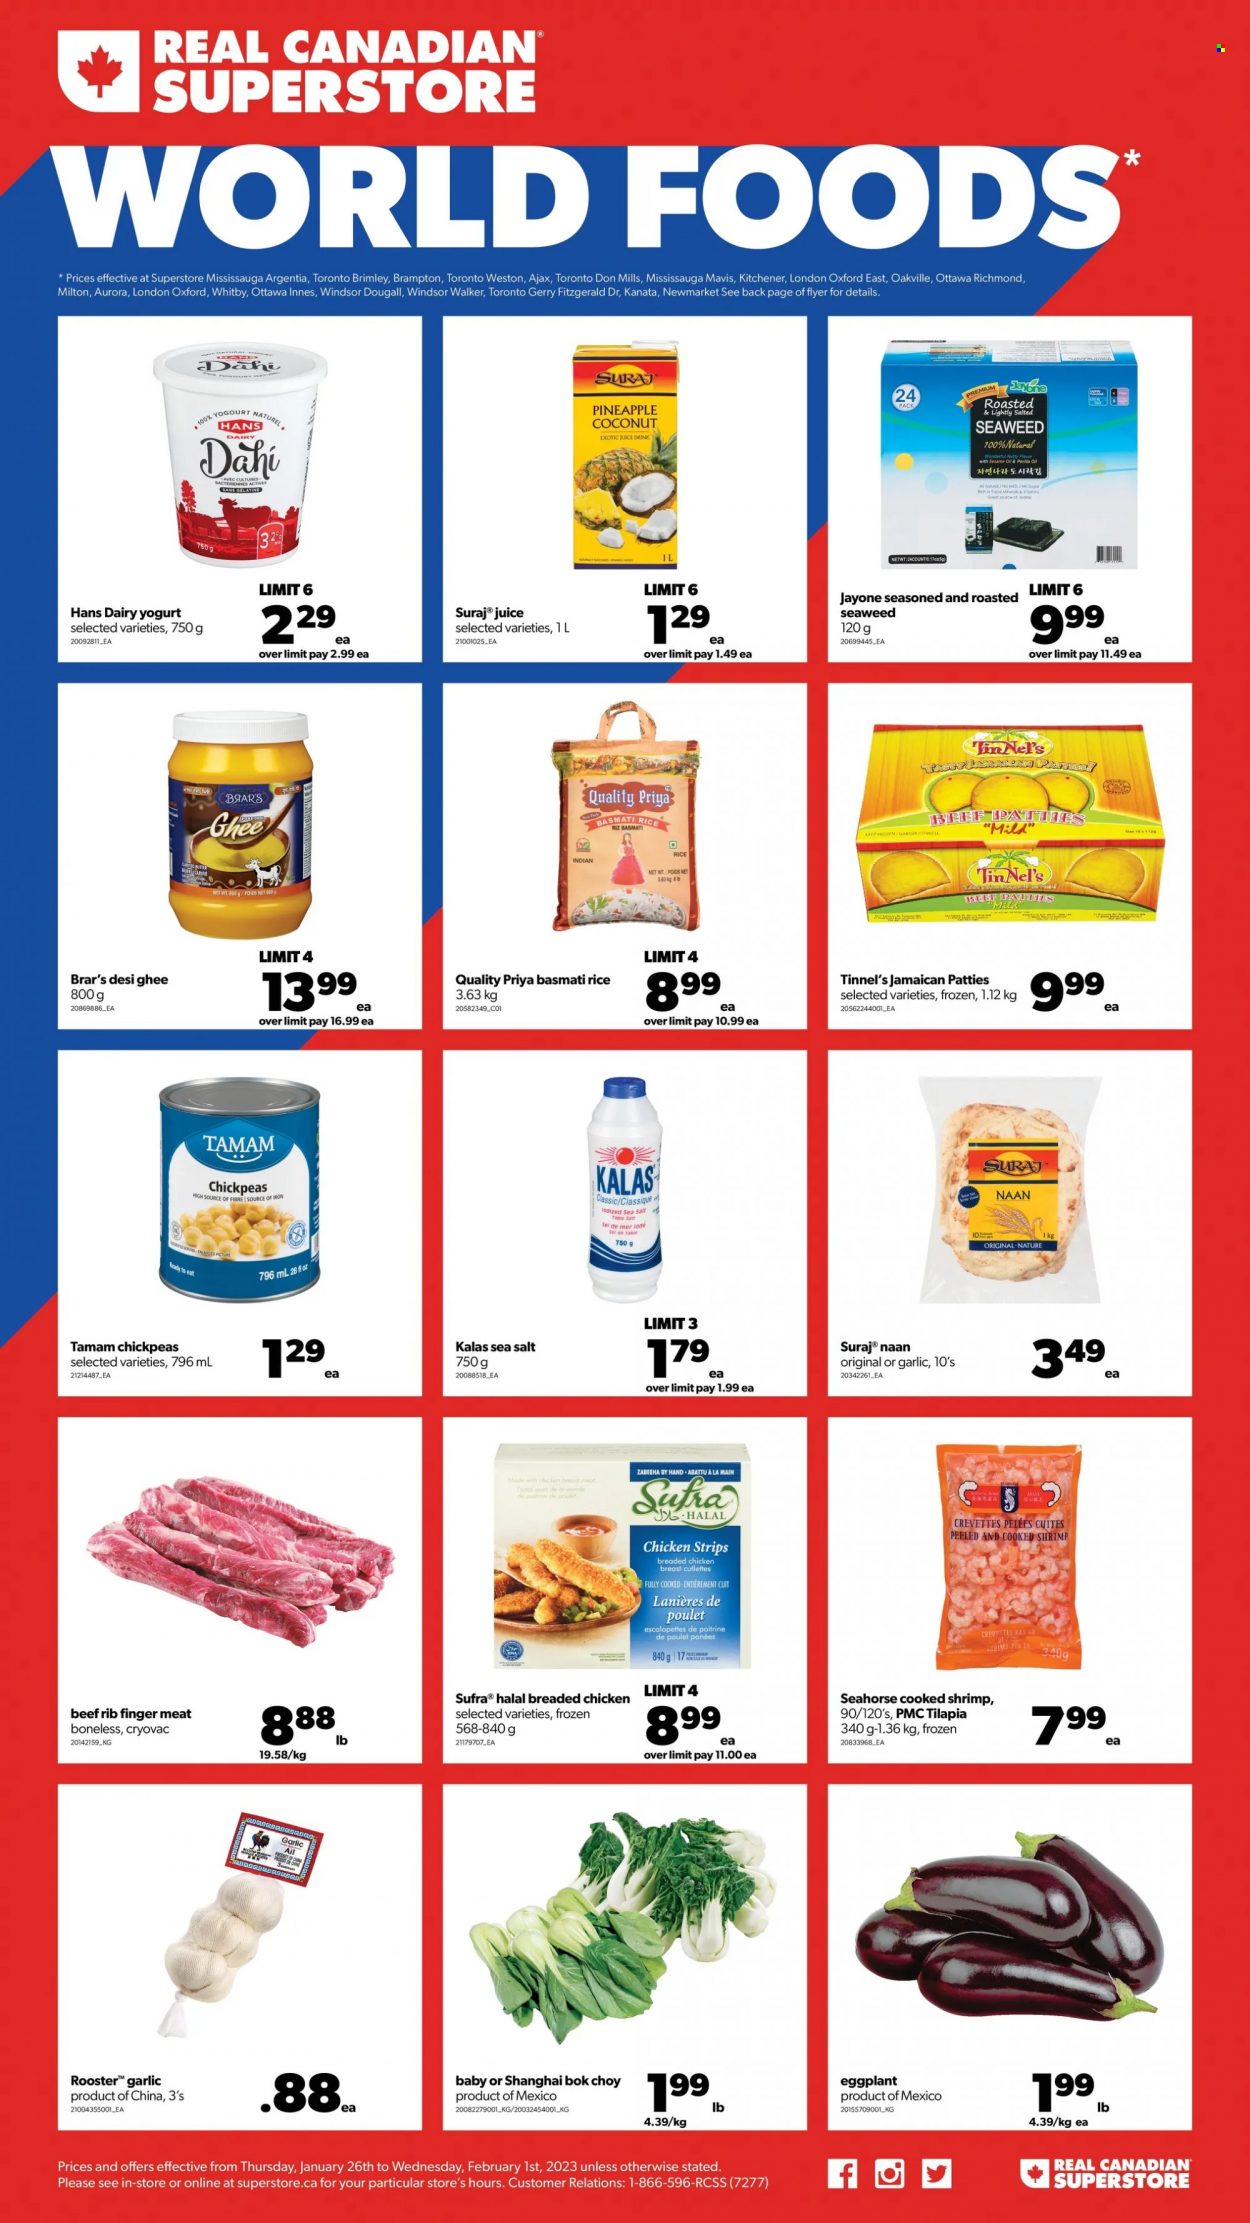 Real Canadian Superstore Flyer - January 26, 2023 - February 01, 2023 - Sales products - bok choy, garlic, eggplant, pineapple, coconut, tilapia, shrimps, fried chicken, yoghurt, ghee, strips, chicken strips, seaweed, Priya, basmati rice, rice, chickpeas, juice, chicken meat, Ajax. Page 1.